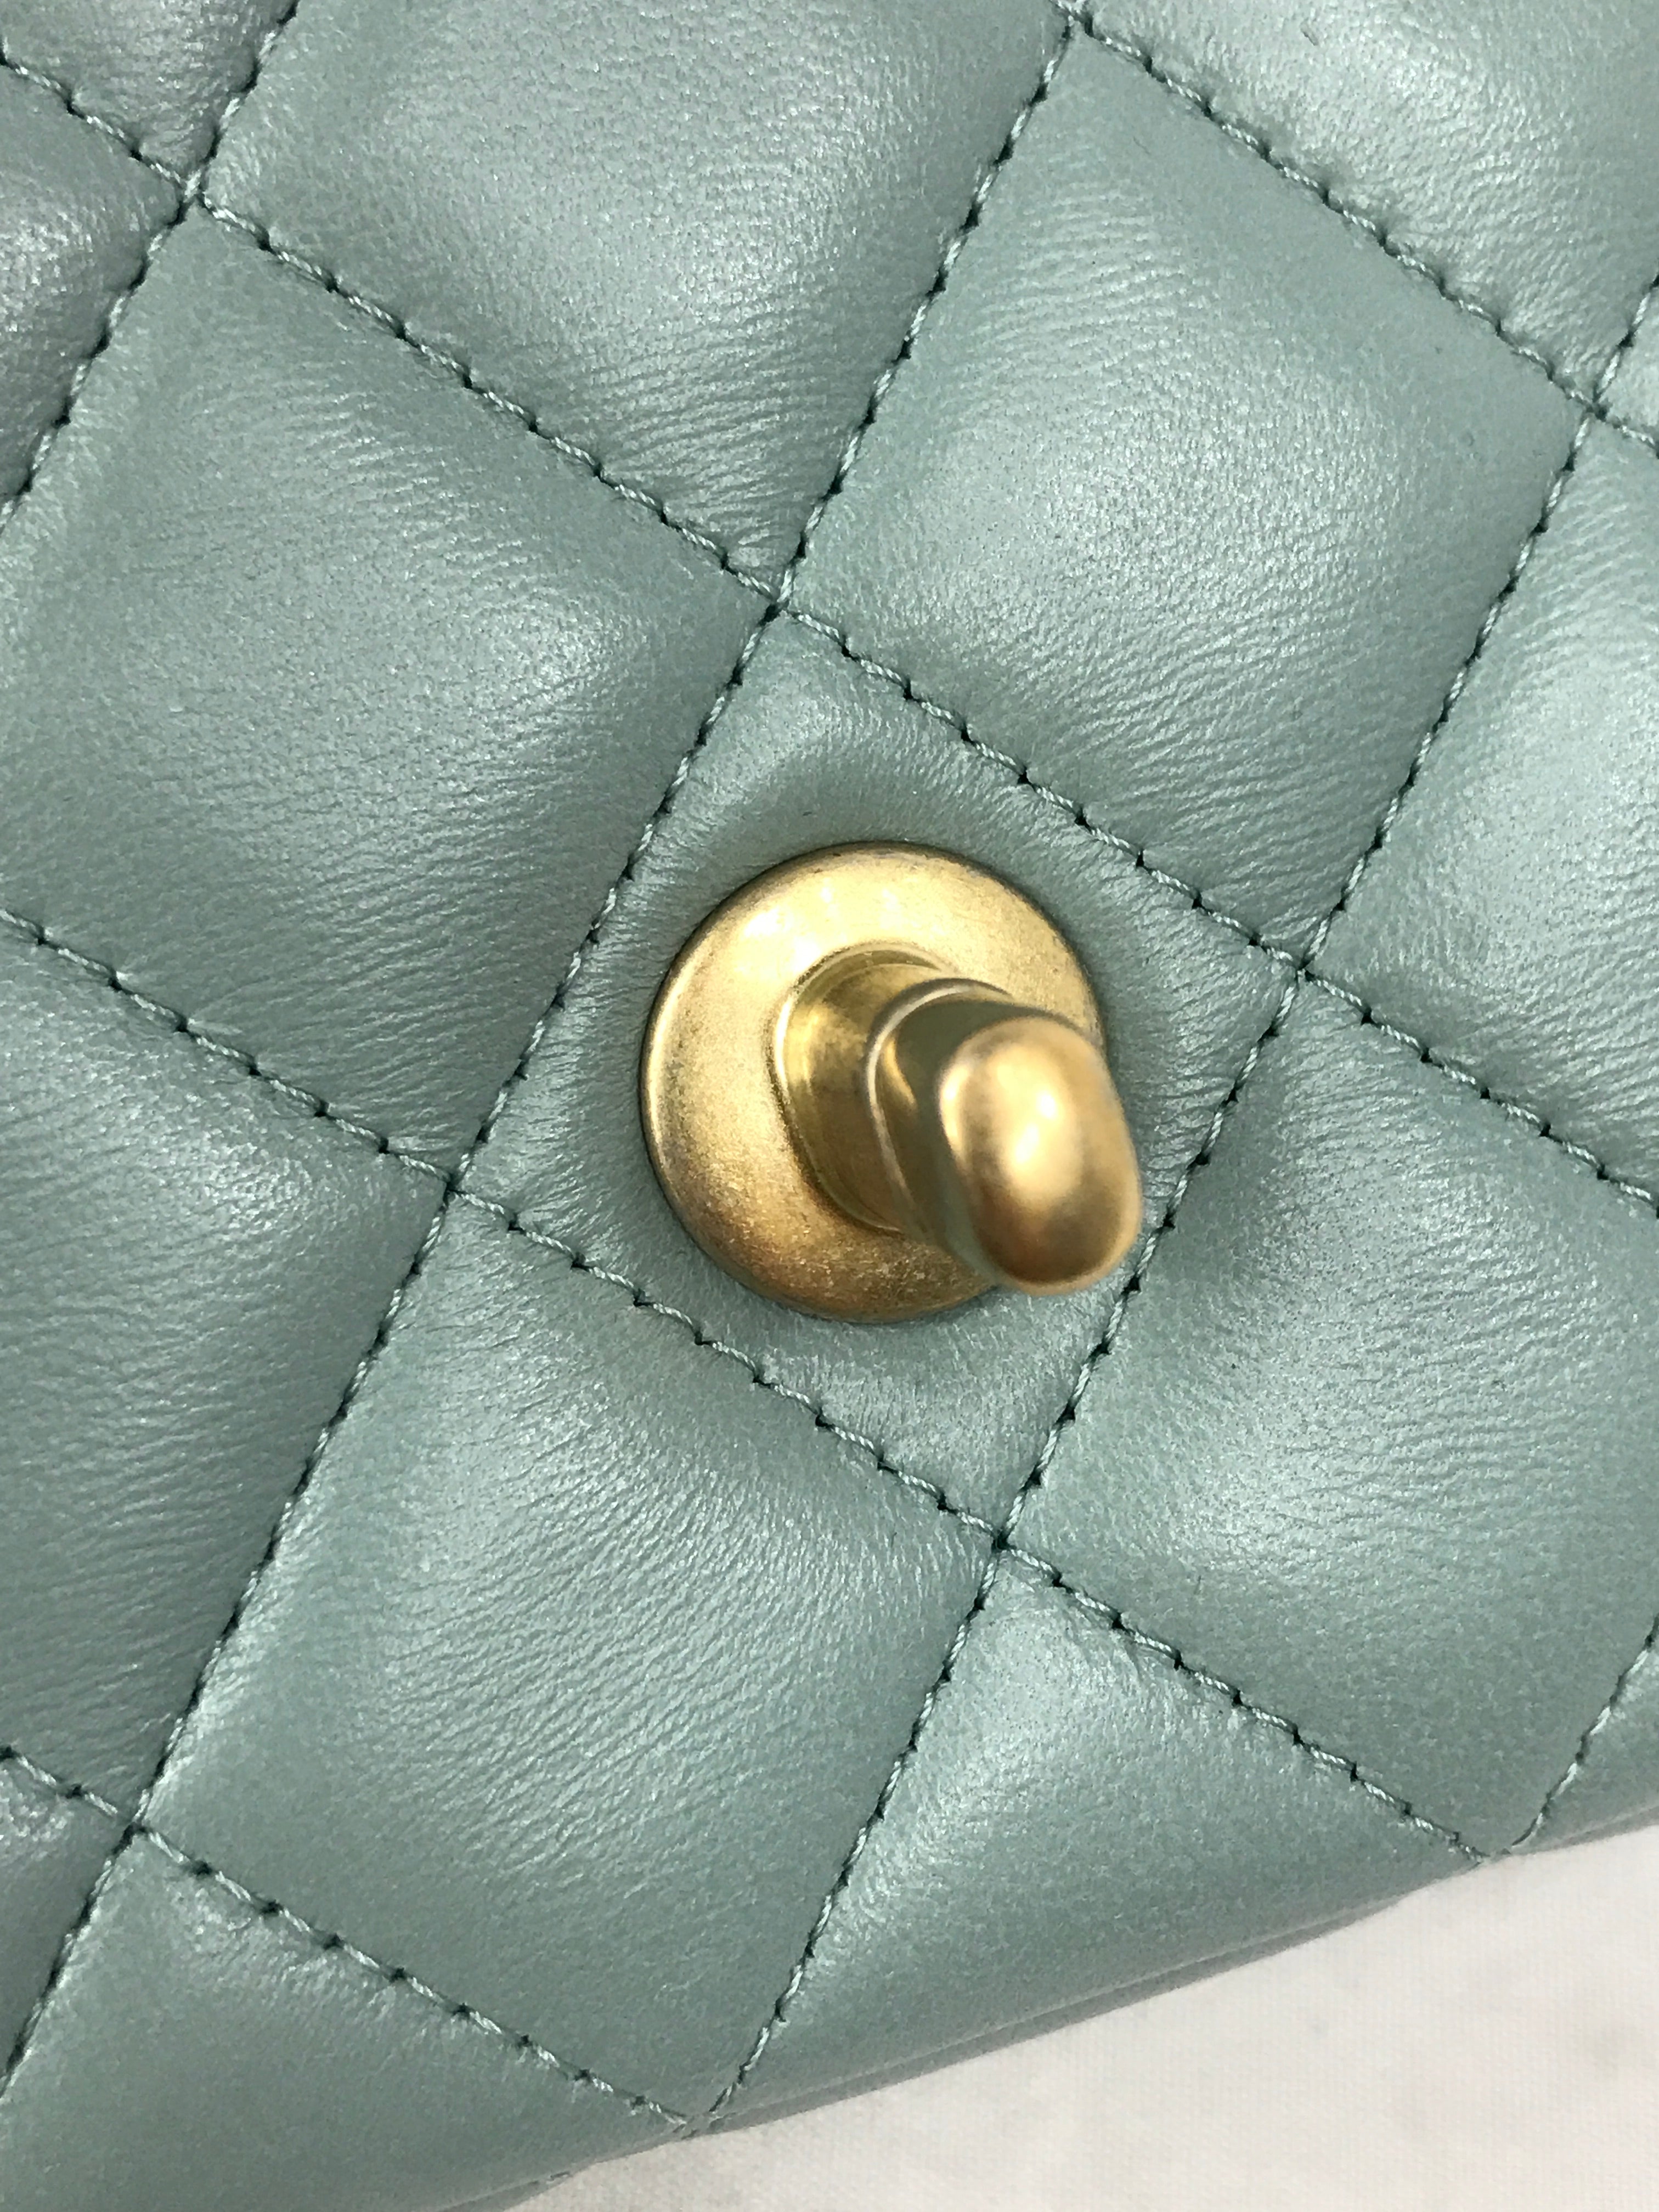 Chanel Light Grey/Blue Quilted Lambskin Mini Cruise Square Flap Bag w/ Enamel & GHW